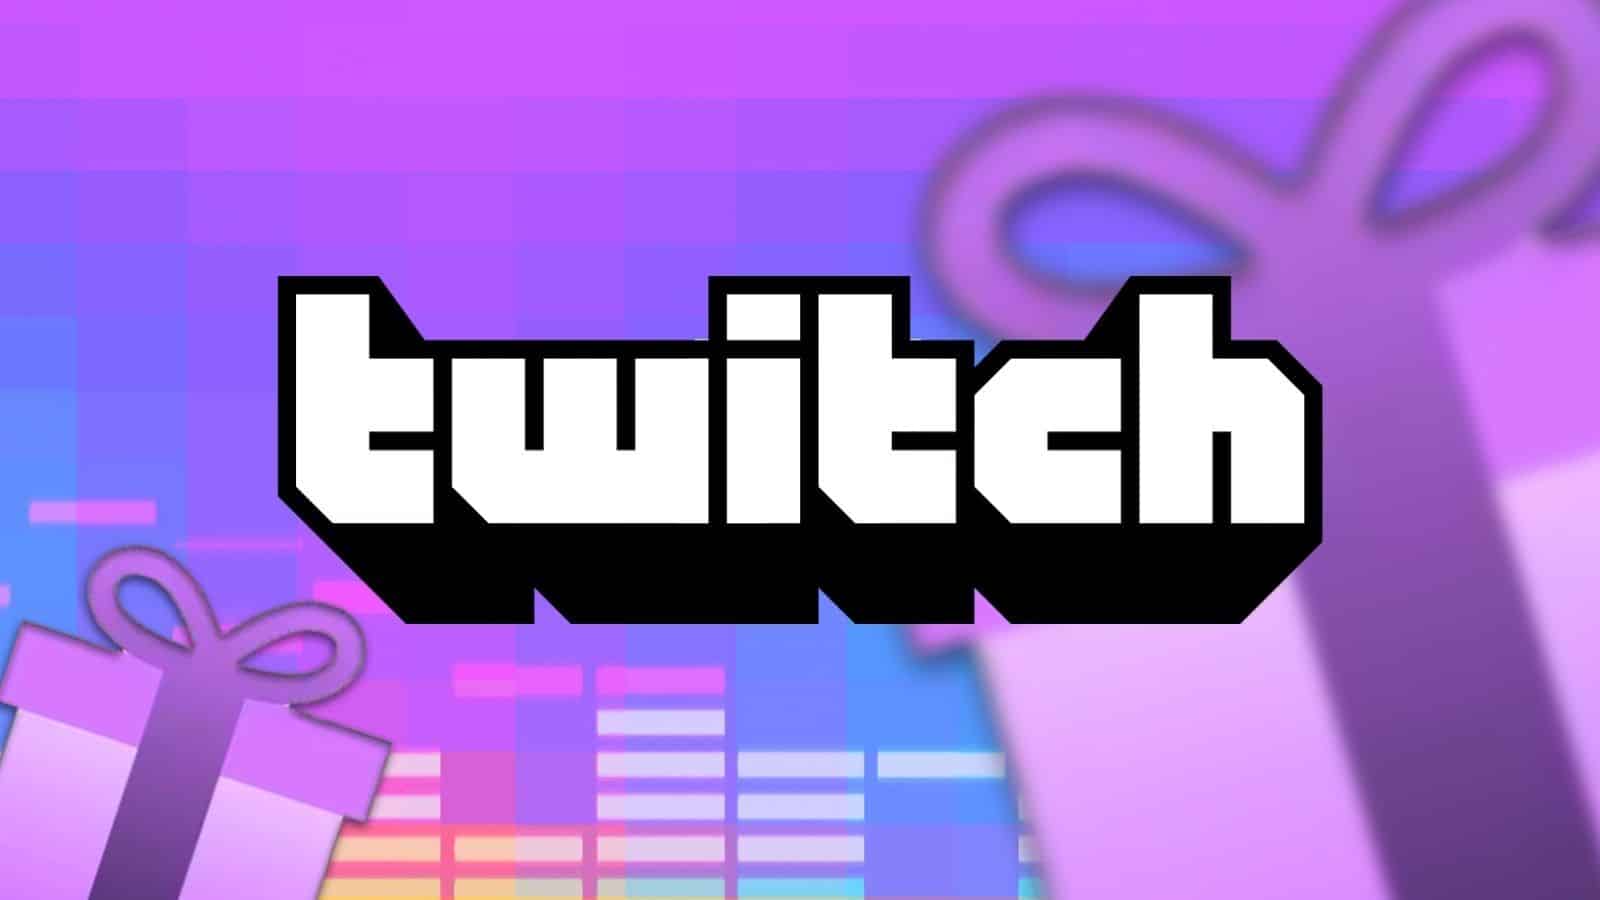 Create custom sub badges or channel points for kick twitch by